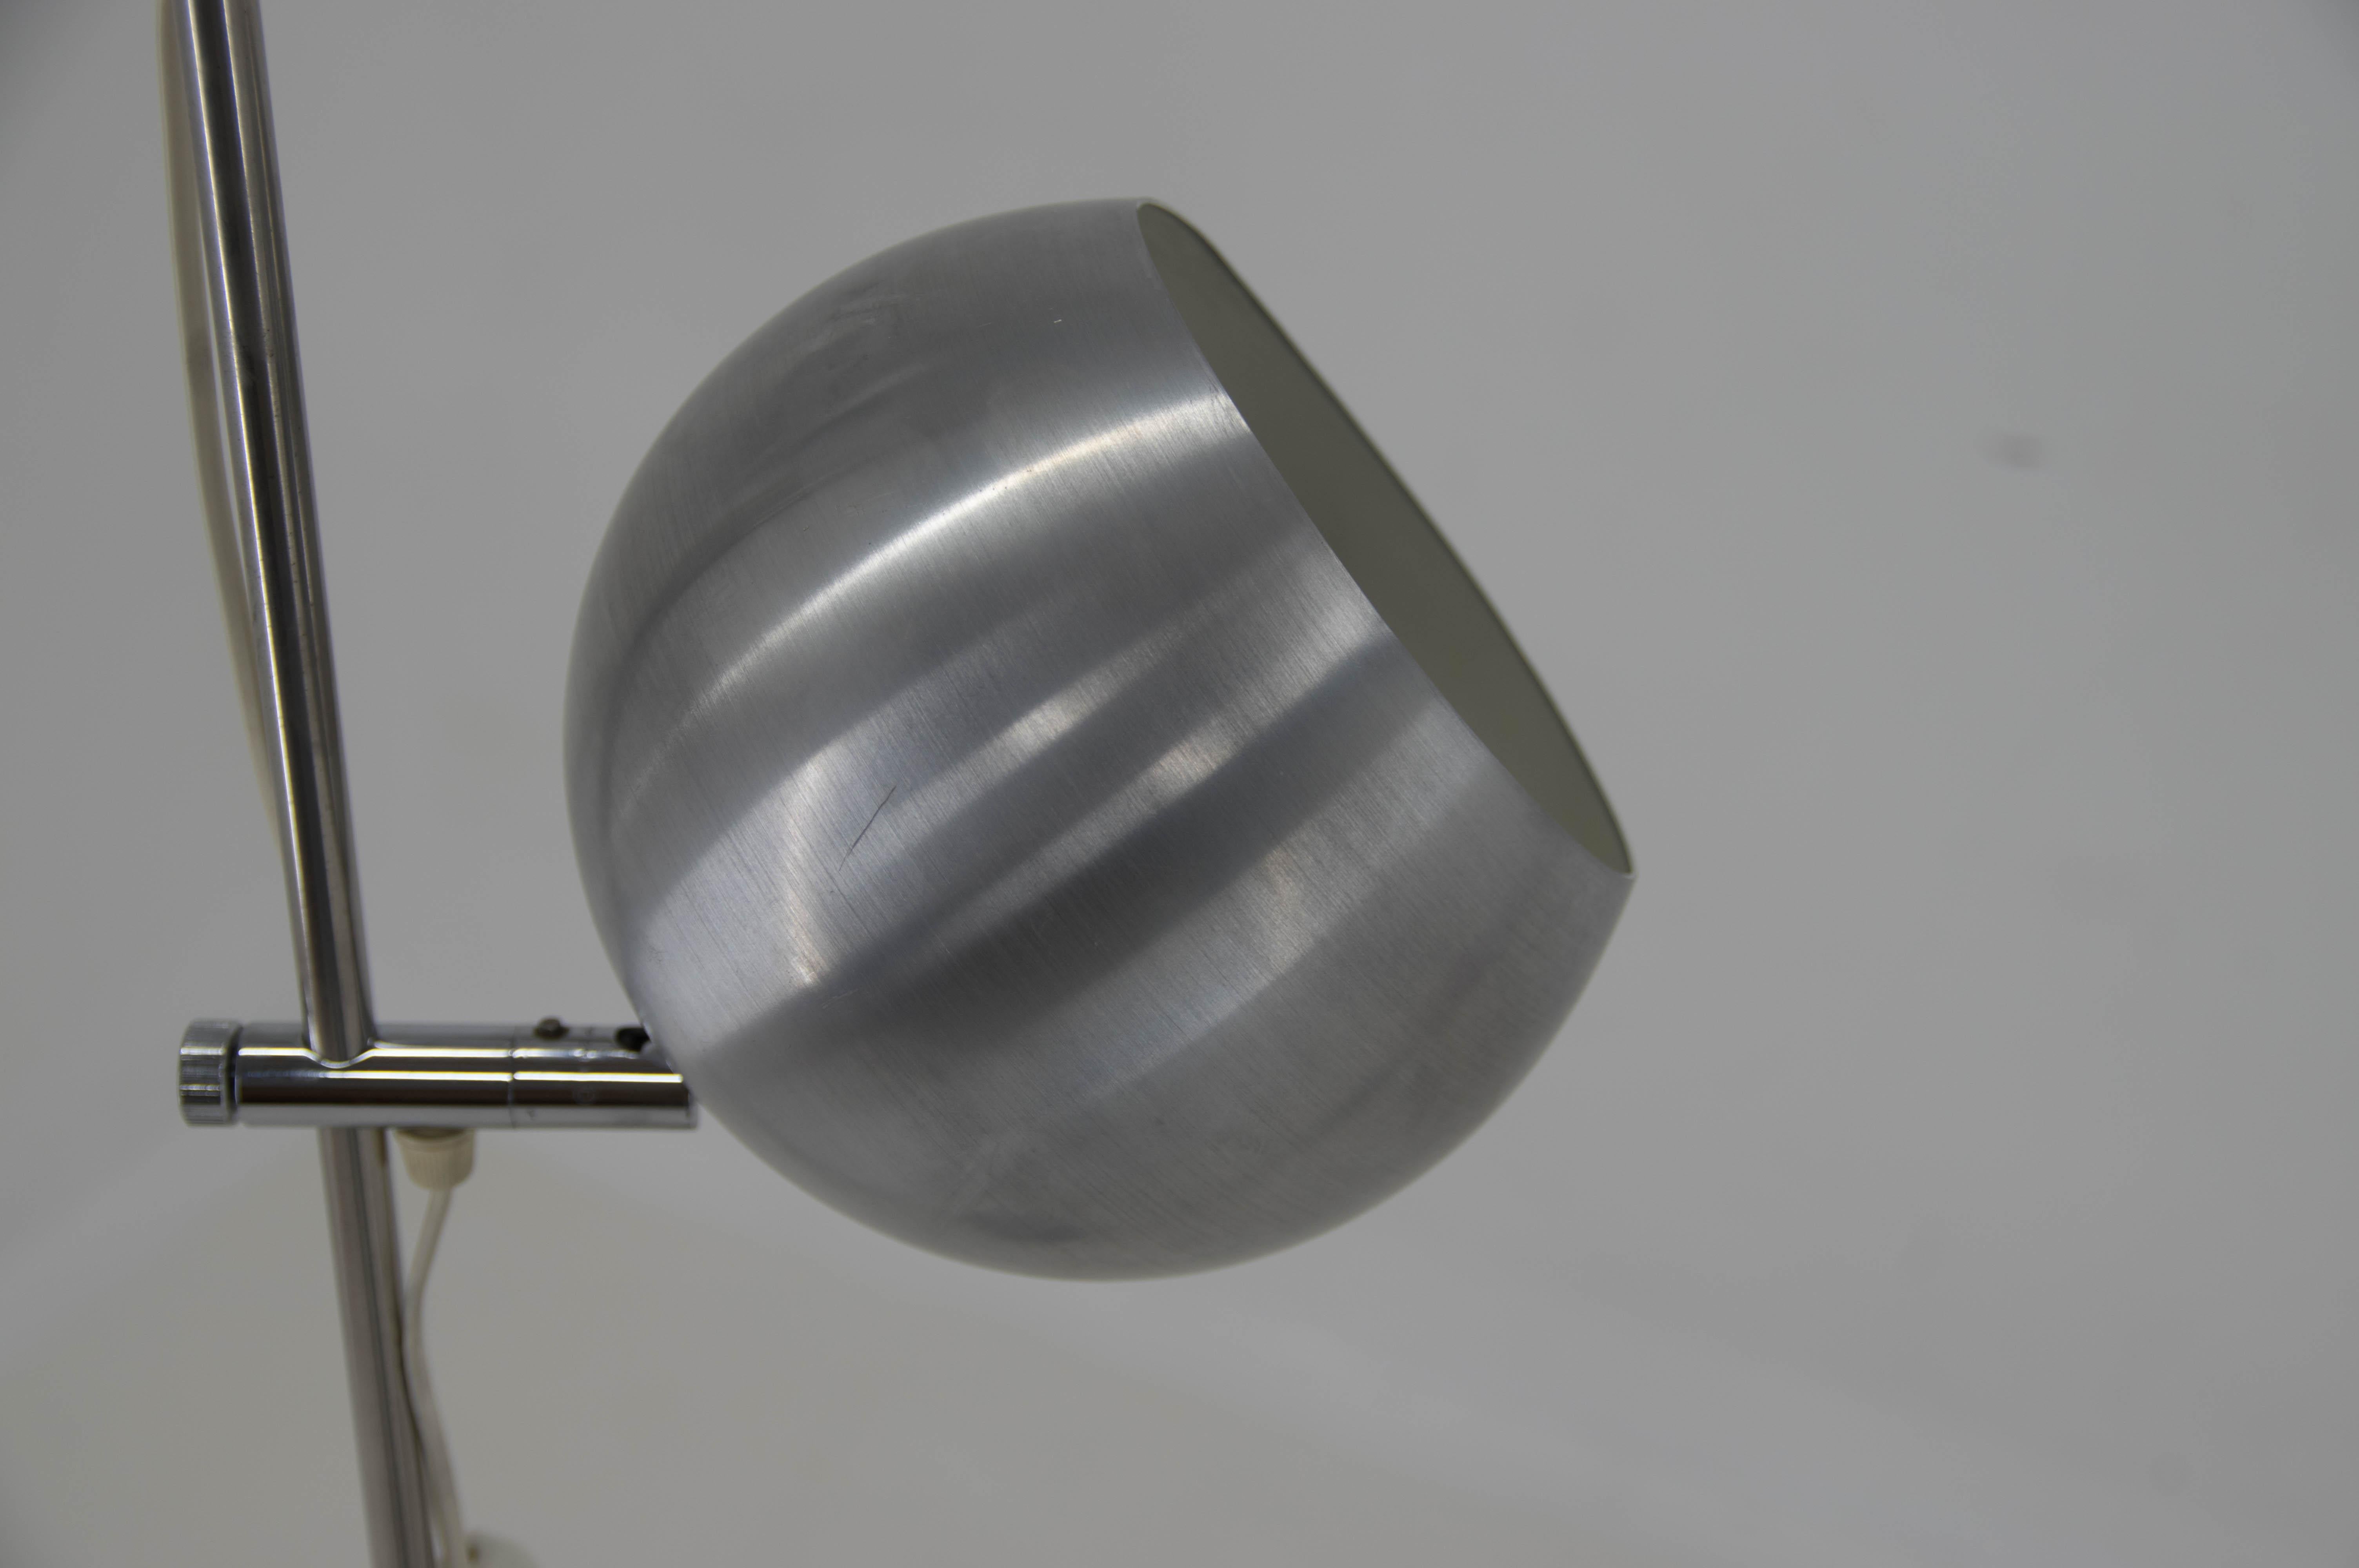 Aluminum Floor Lamp with Flexible Shades, Europe, 1960s For Sale